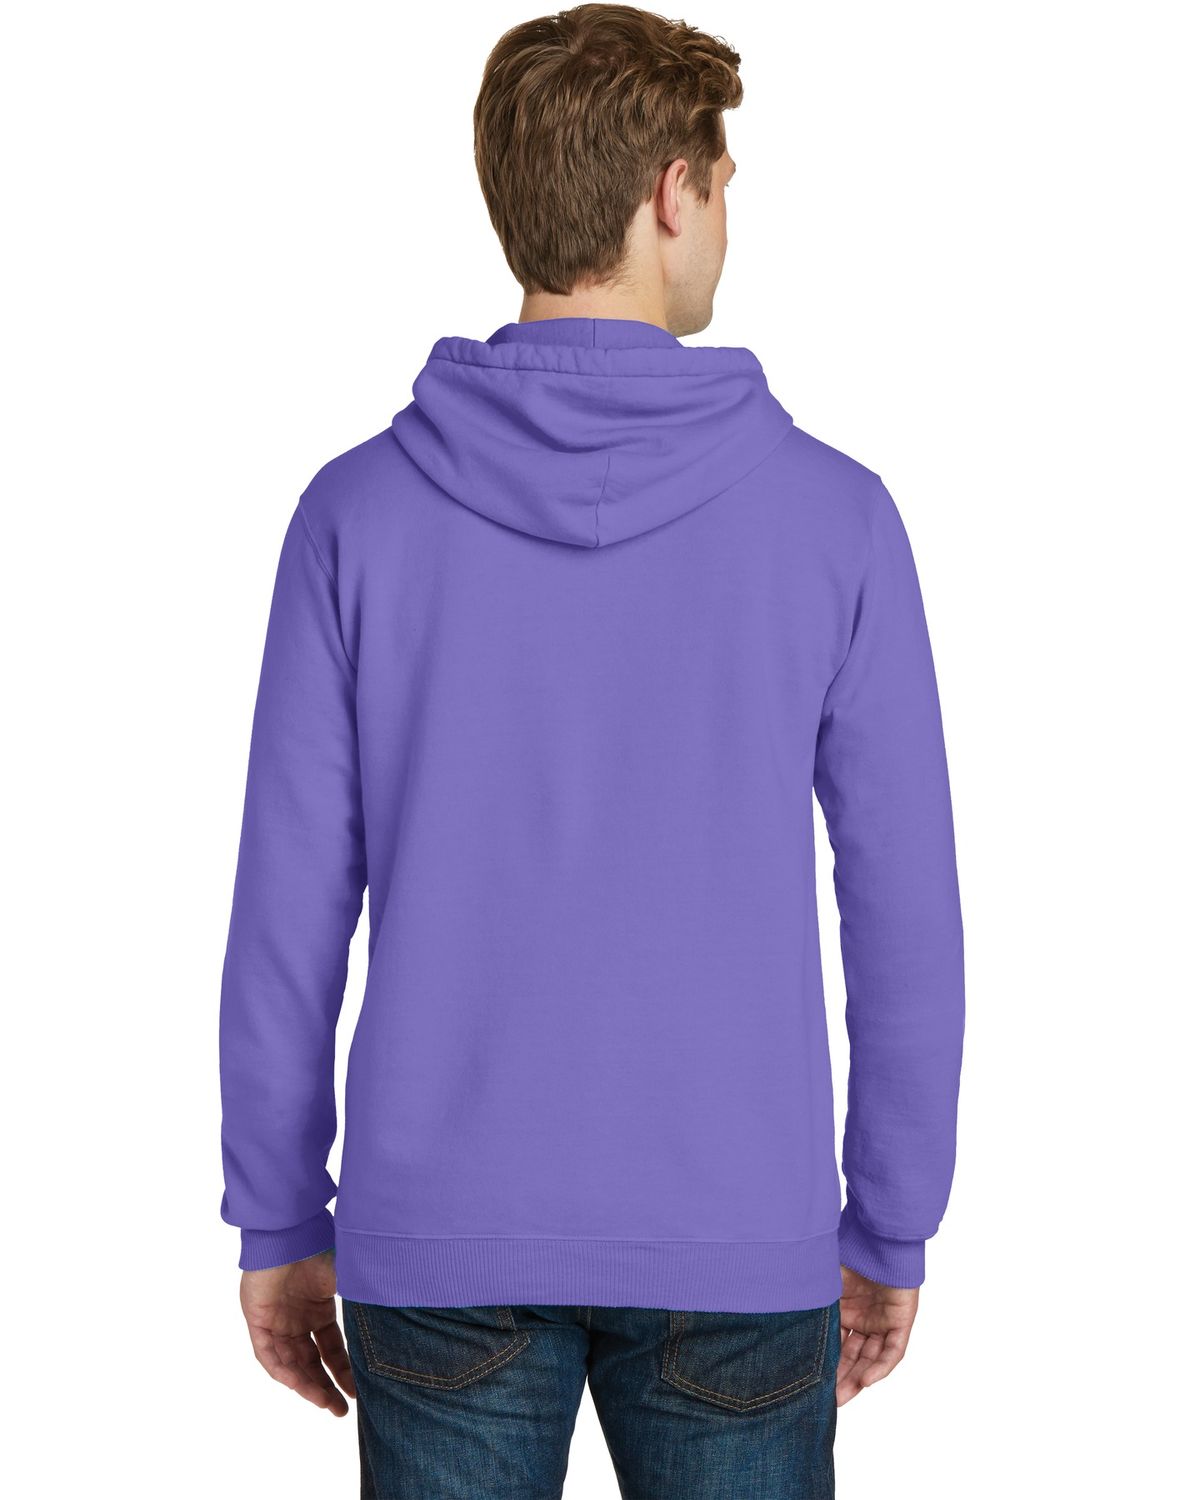 'Port & Company PC098H Pigment-Dyed Pullover Hooded Sweatshirt'